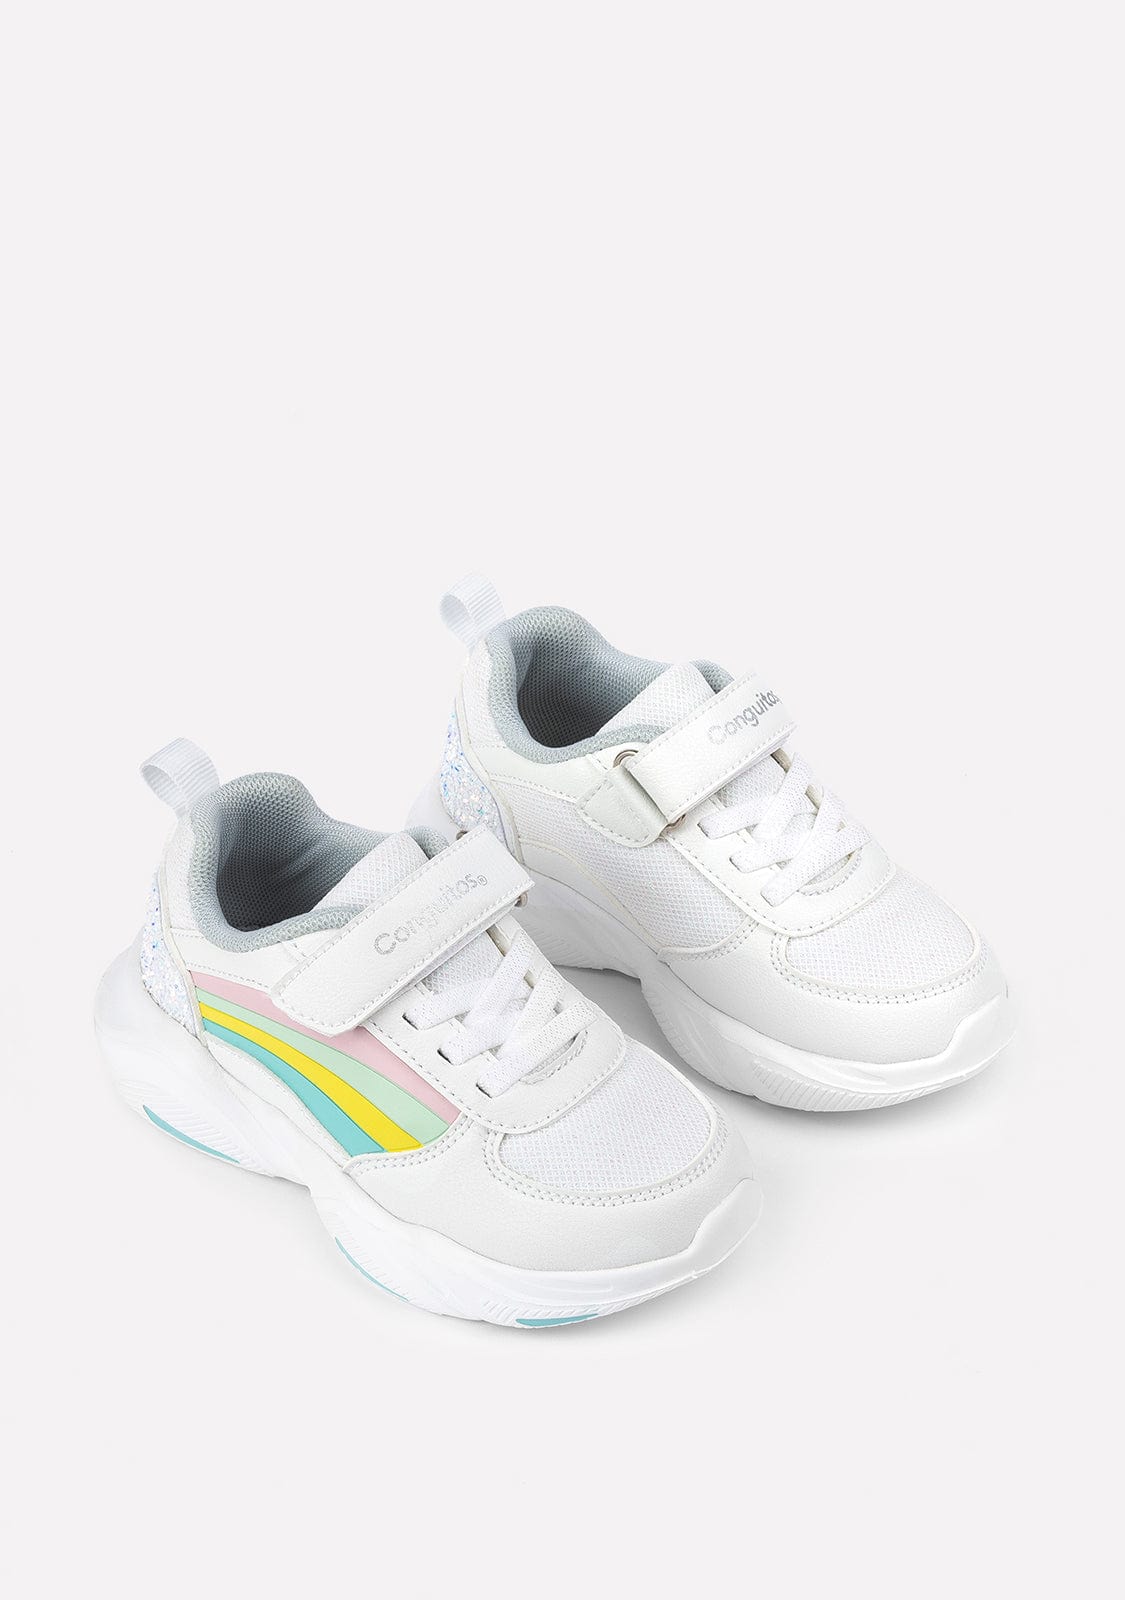 CONGUITOS Shoes Girl's White Rainbow With Lights Sneakers